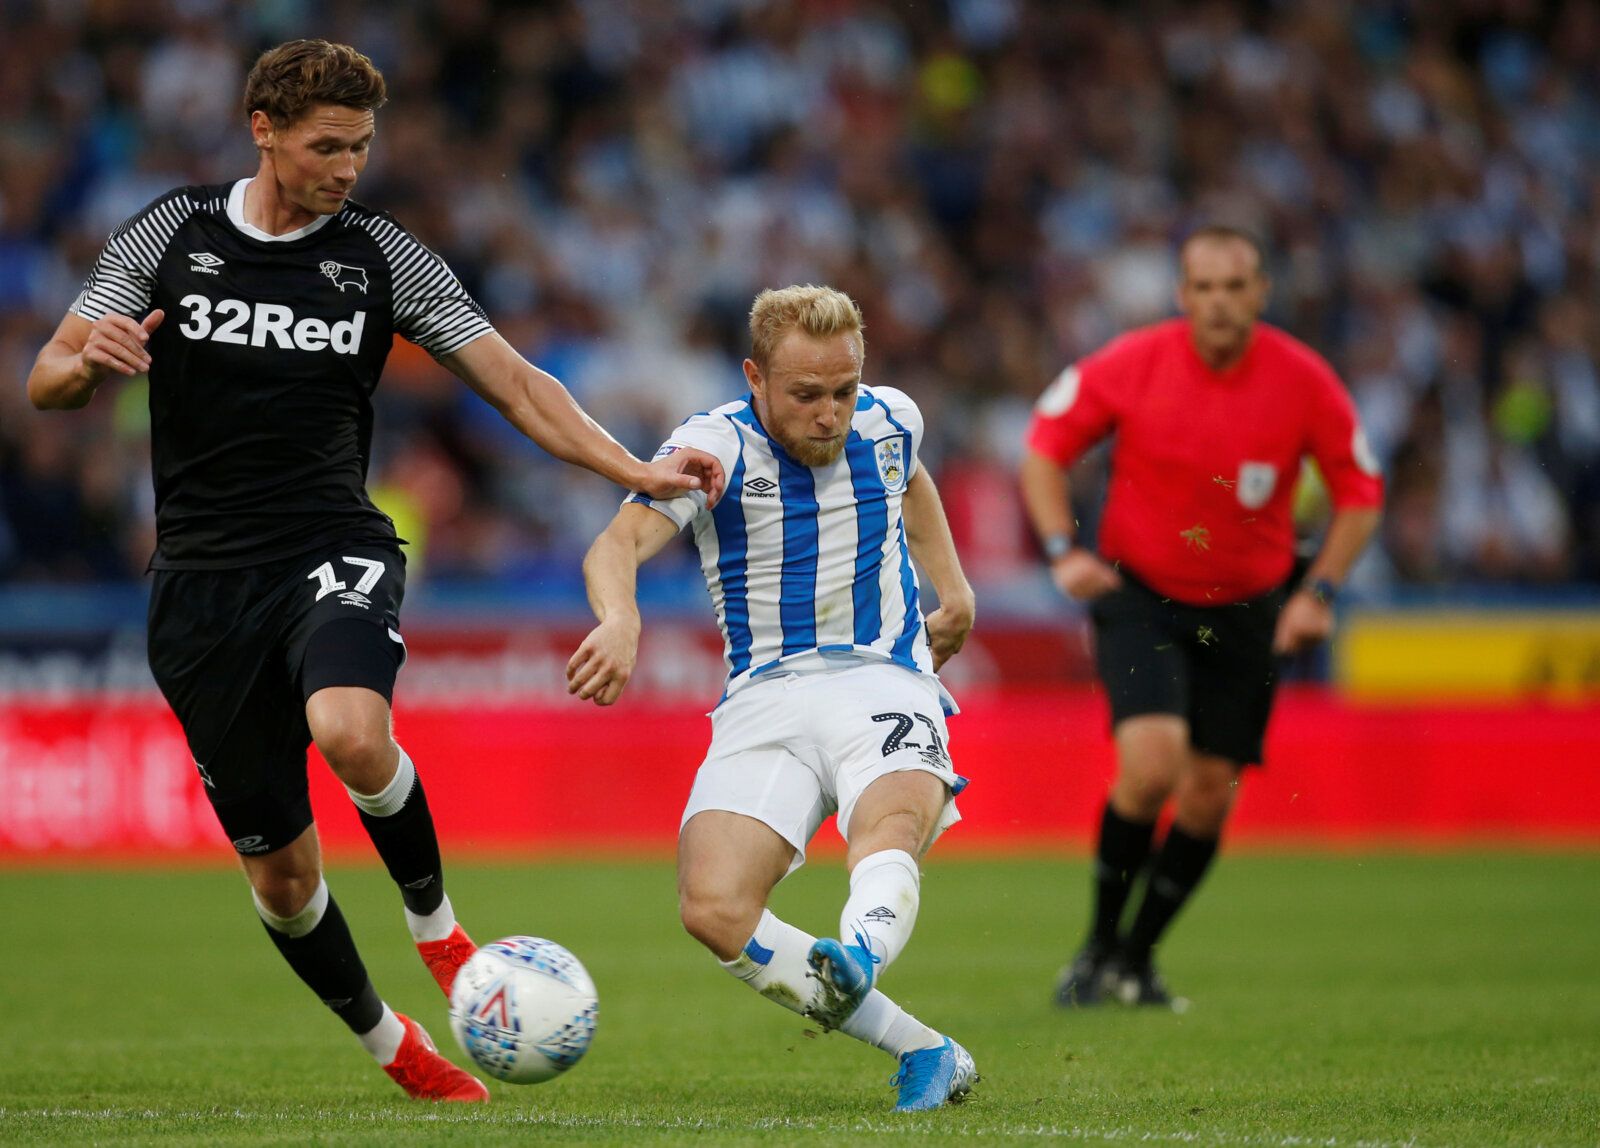 Soccer Football - Championship - Huddersfield Town v Derby County - John Smith's Stadium, Huddersfield, Britain - August 5, 2019  Huddersfield Town's Alex Pritchard shoots at goal  Action Images/Ed Sykes  EDITORIAL USE ONLY. No use with unauthorized audio, video, data, fixture lists, club/league logos or 